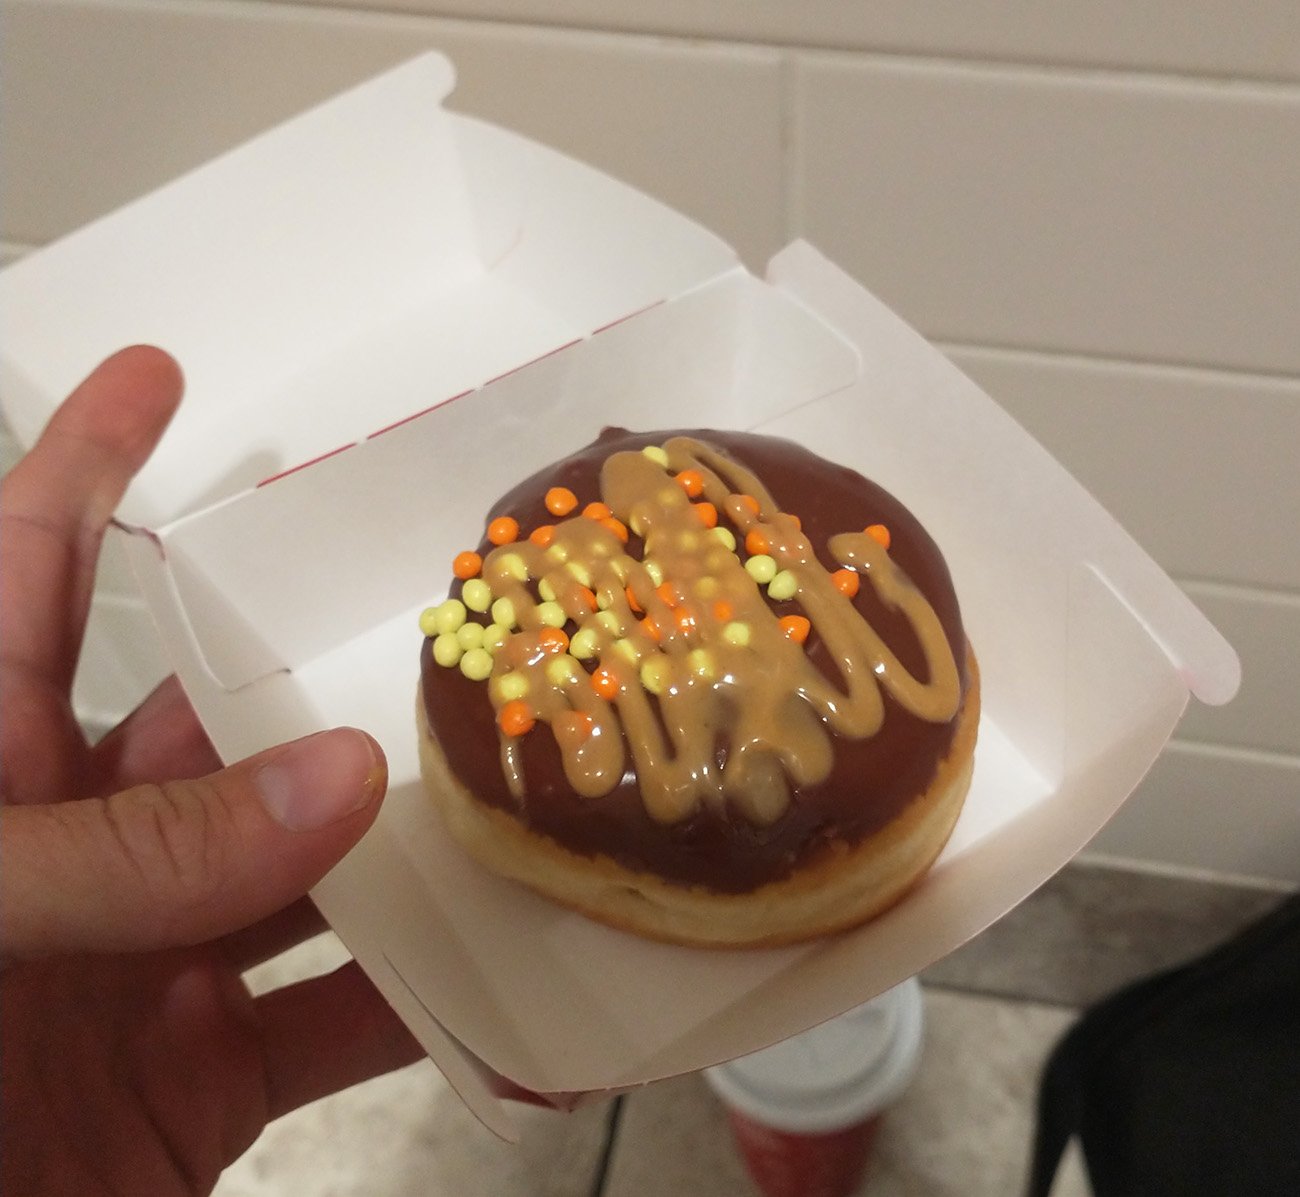 My reward donut from Tim Hortons. I'm collecting the points. Every 8th coffee is free! $$$$$$$$ 